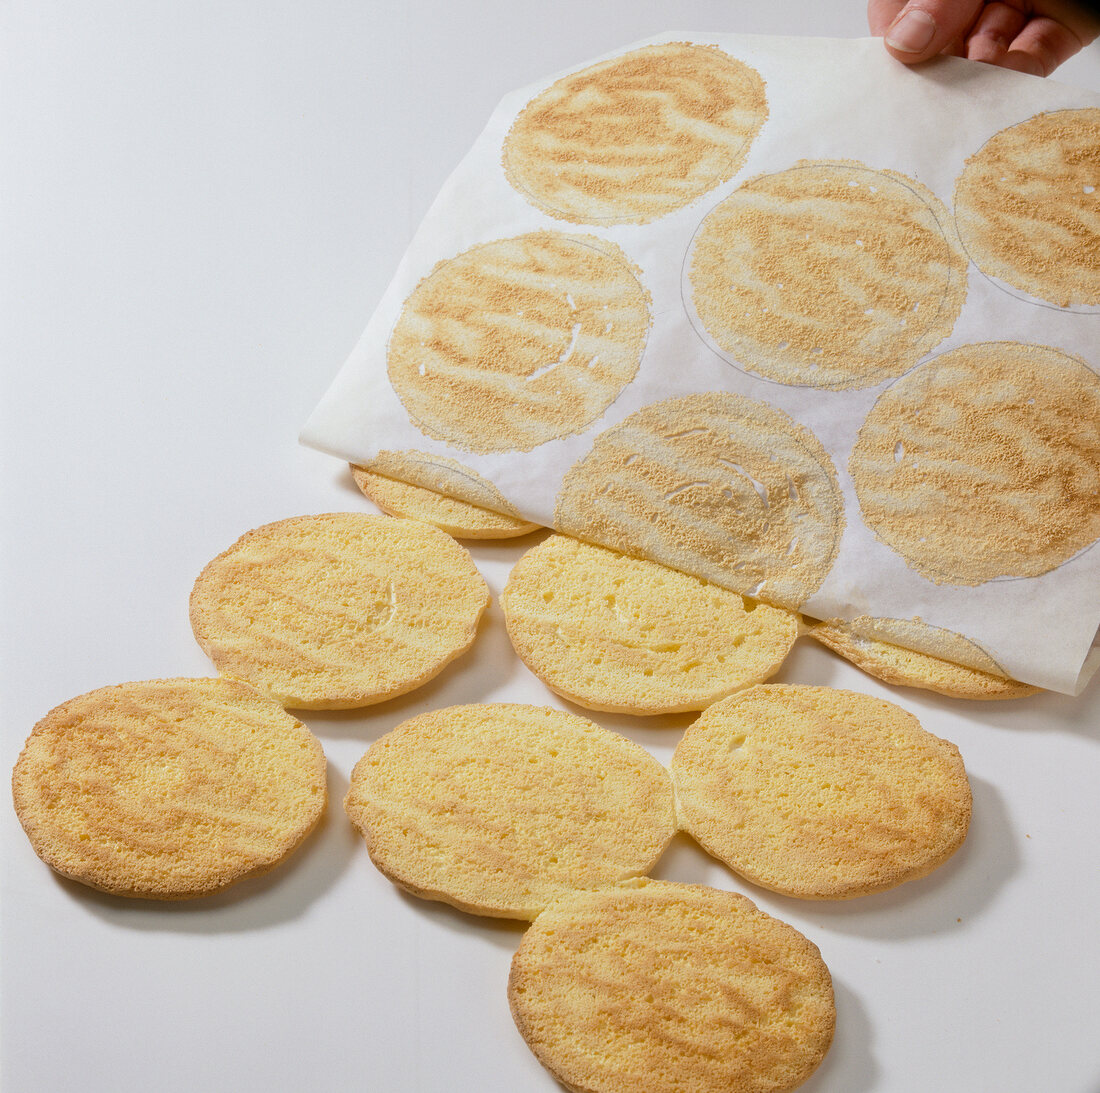 Baked biscuits being separated from baking paper